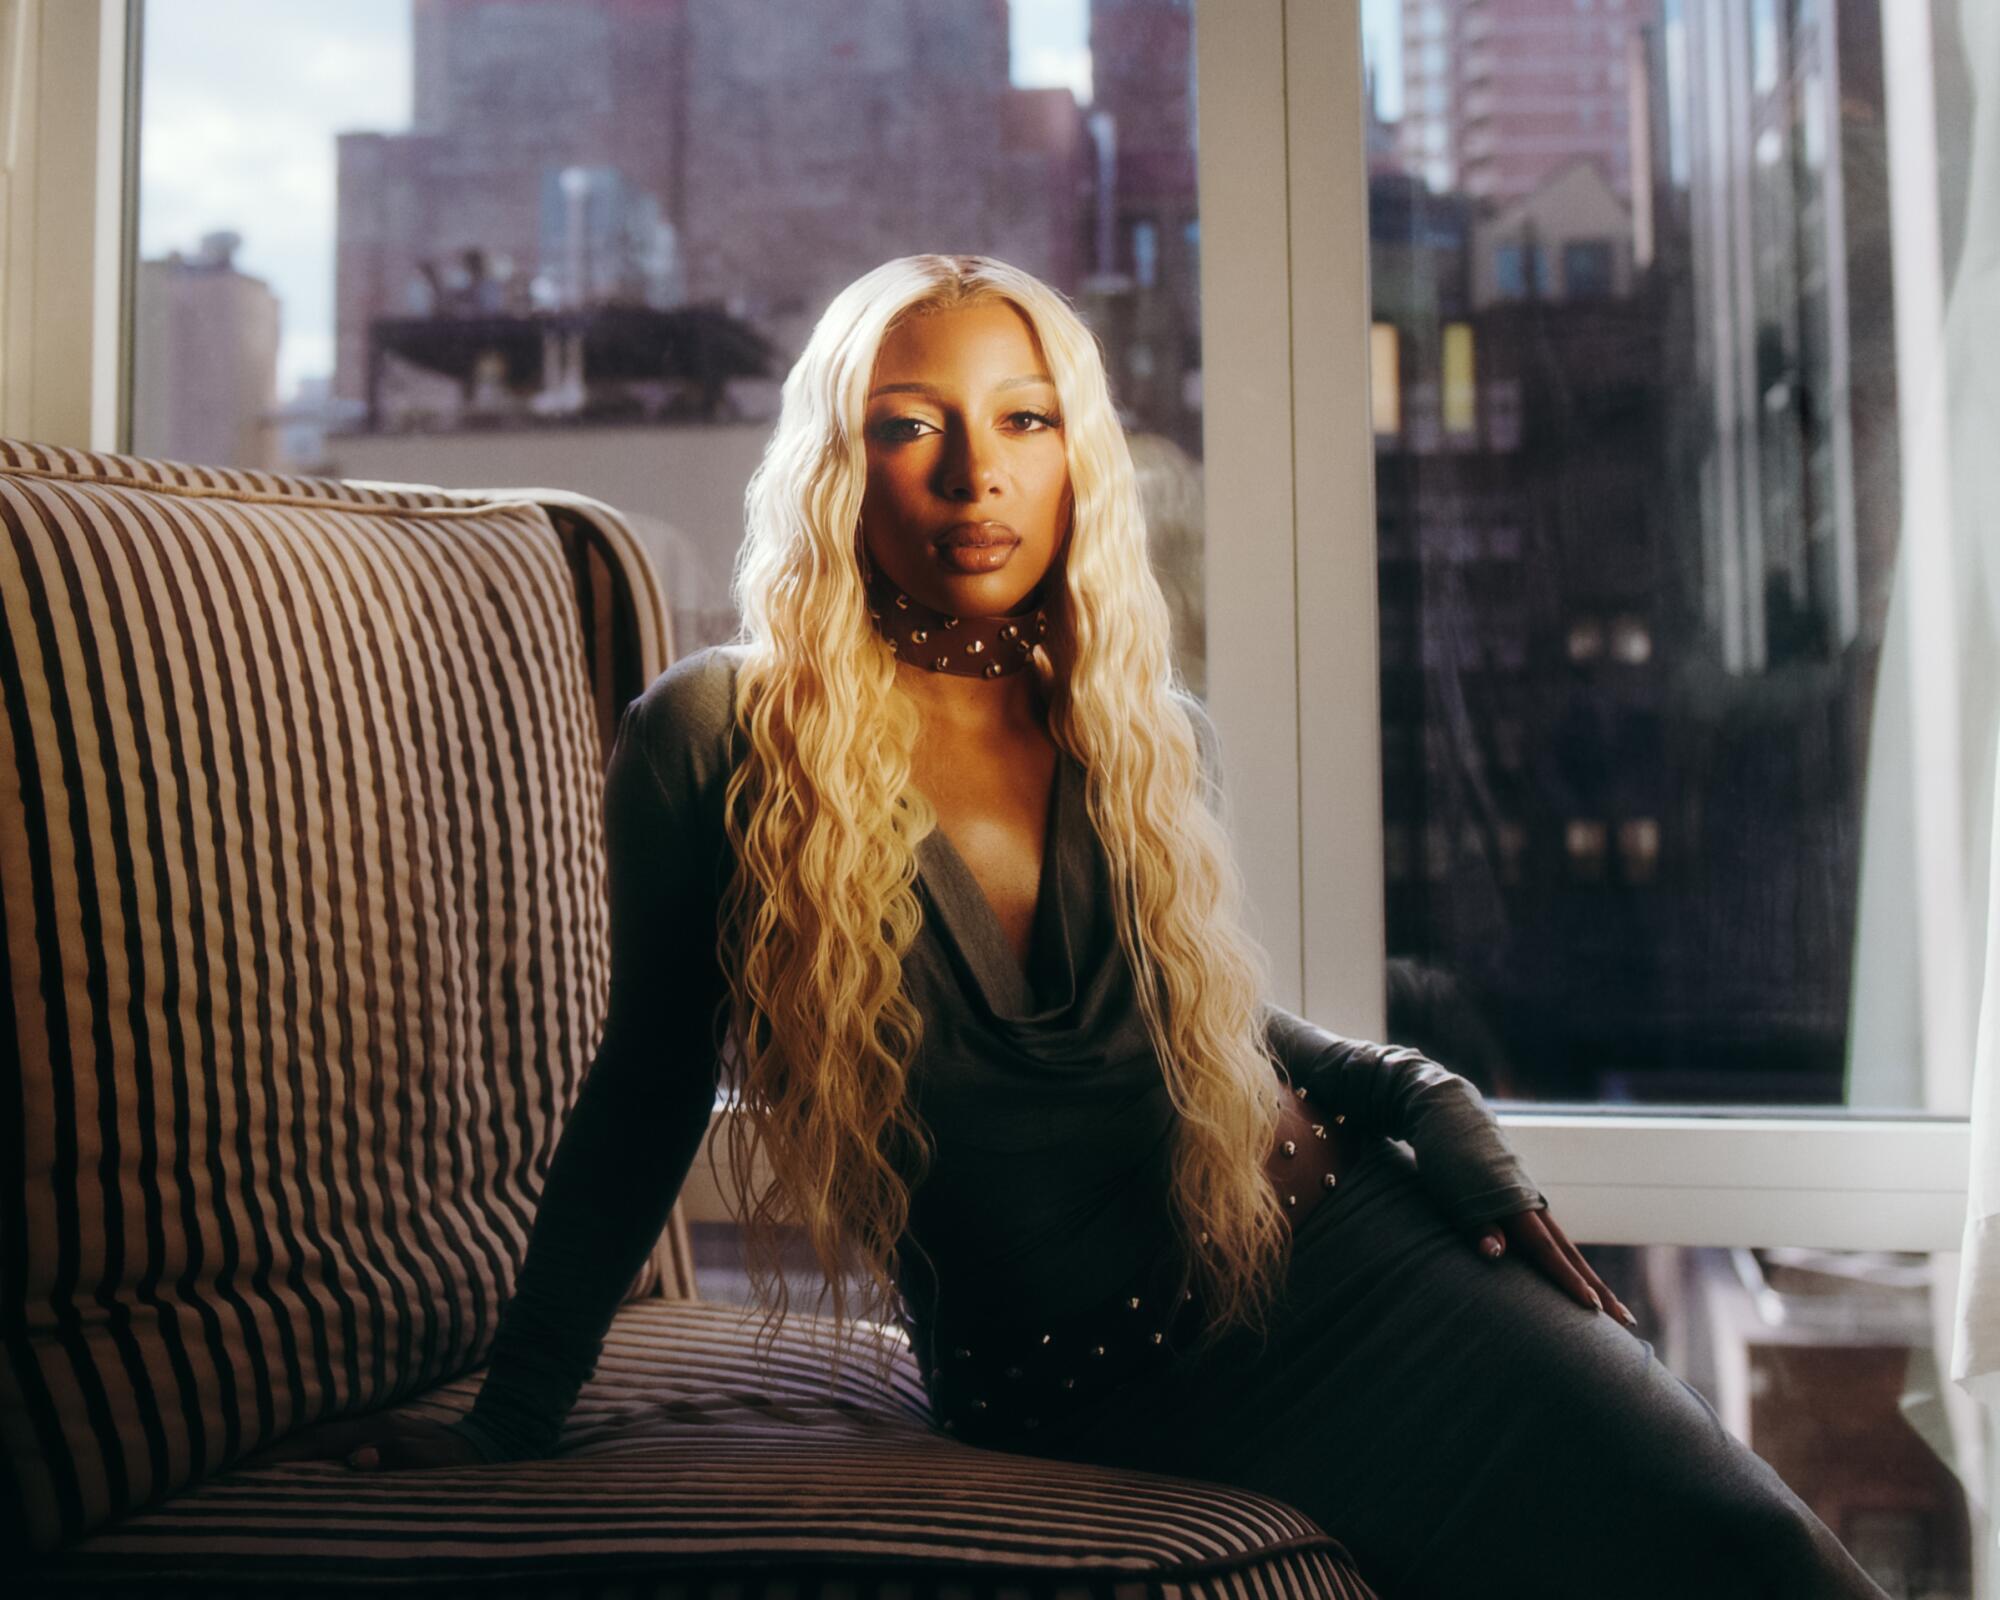 A female R&B singer with long blond hair sits on a sofa